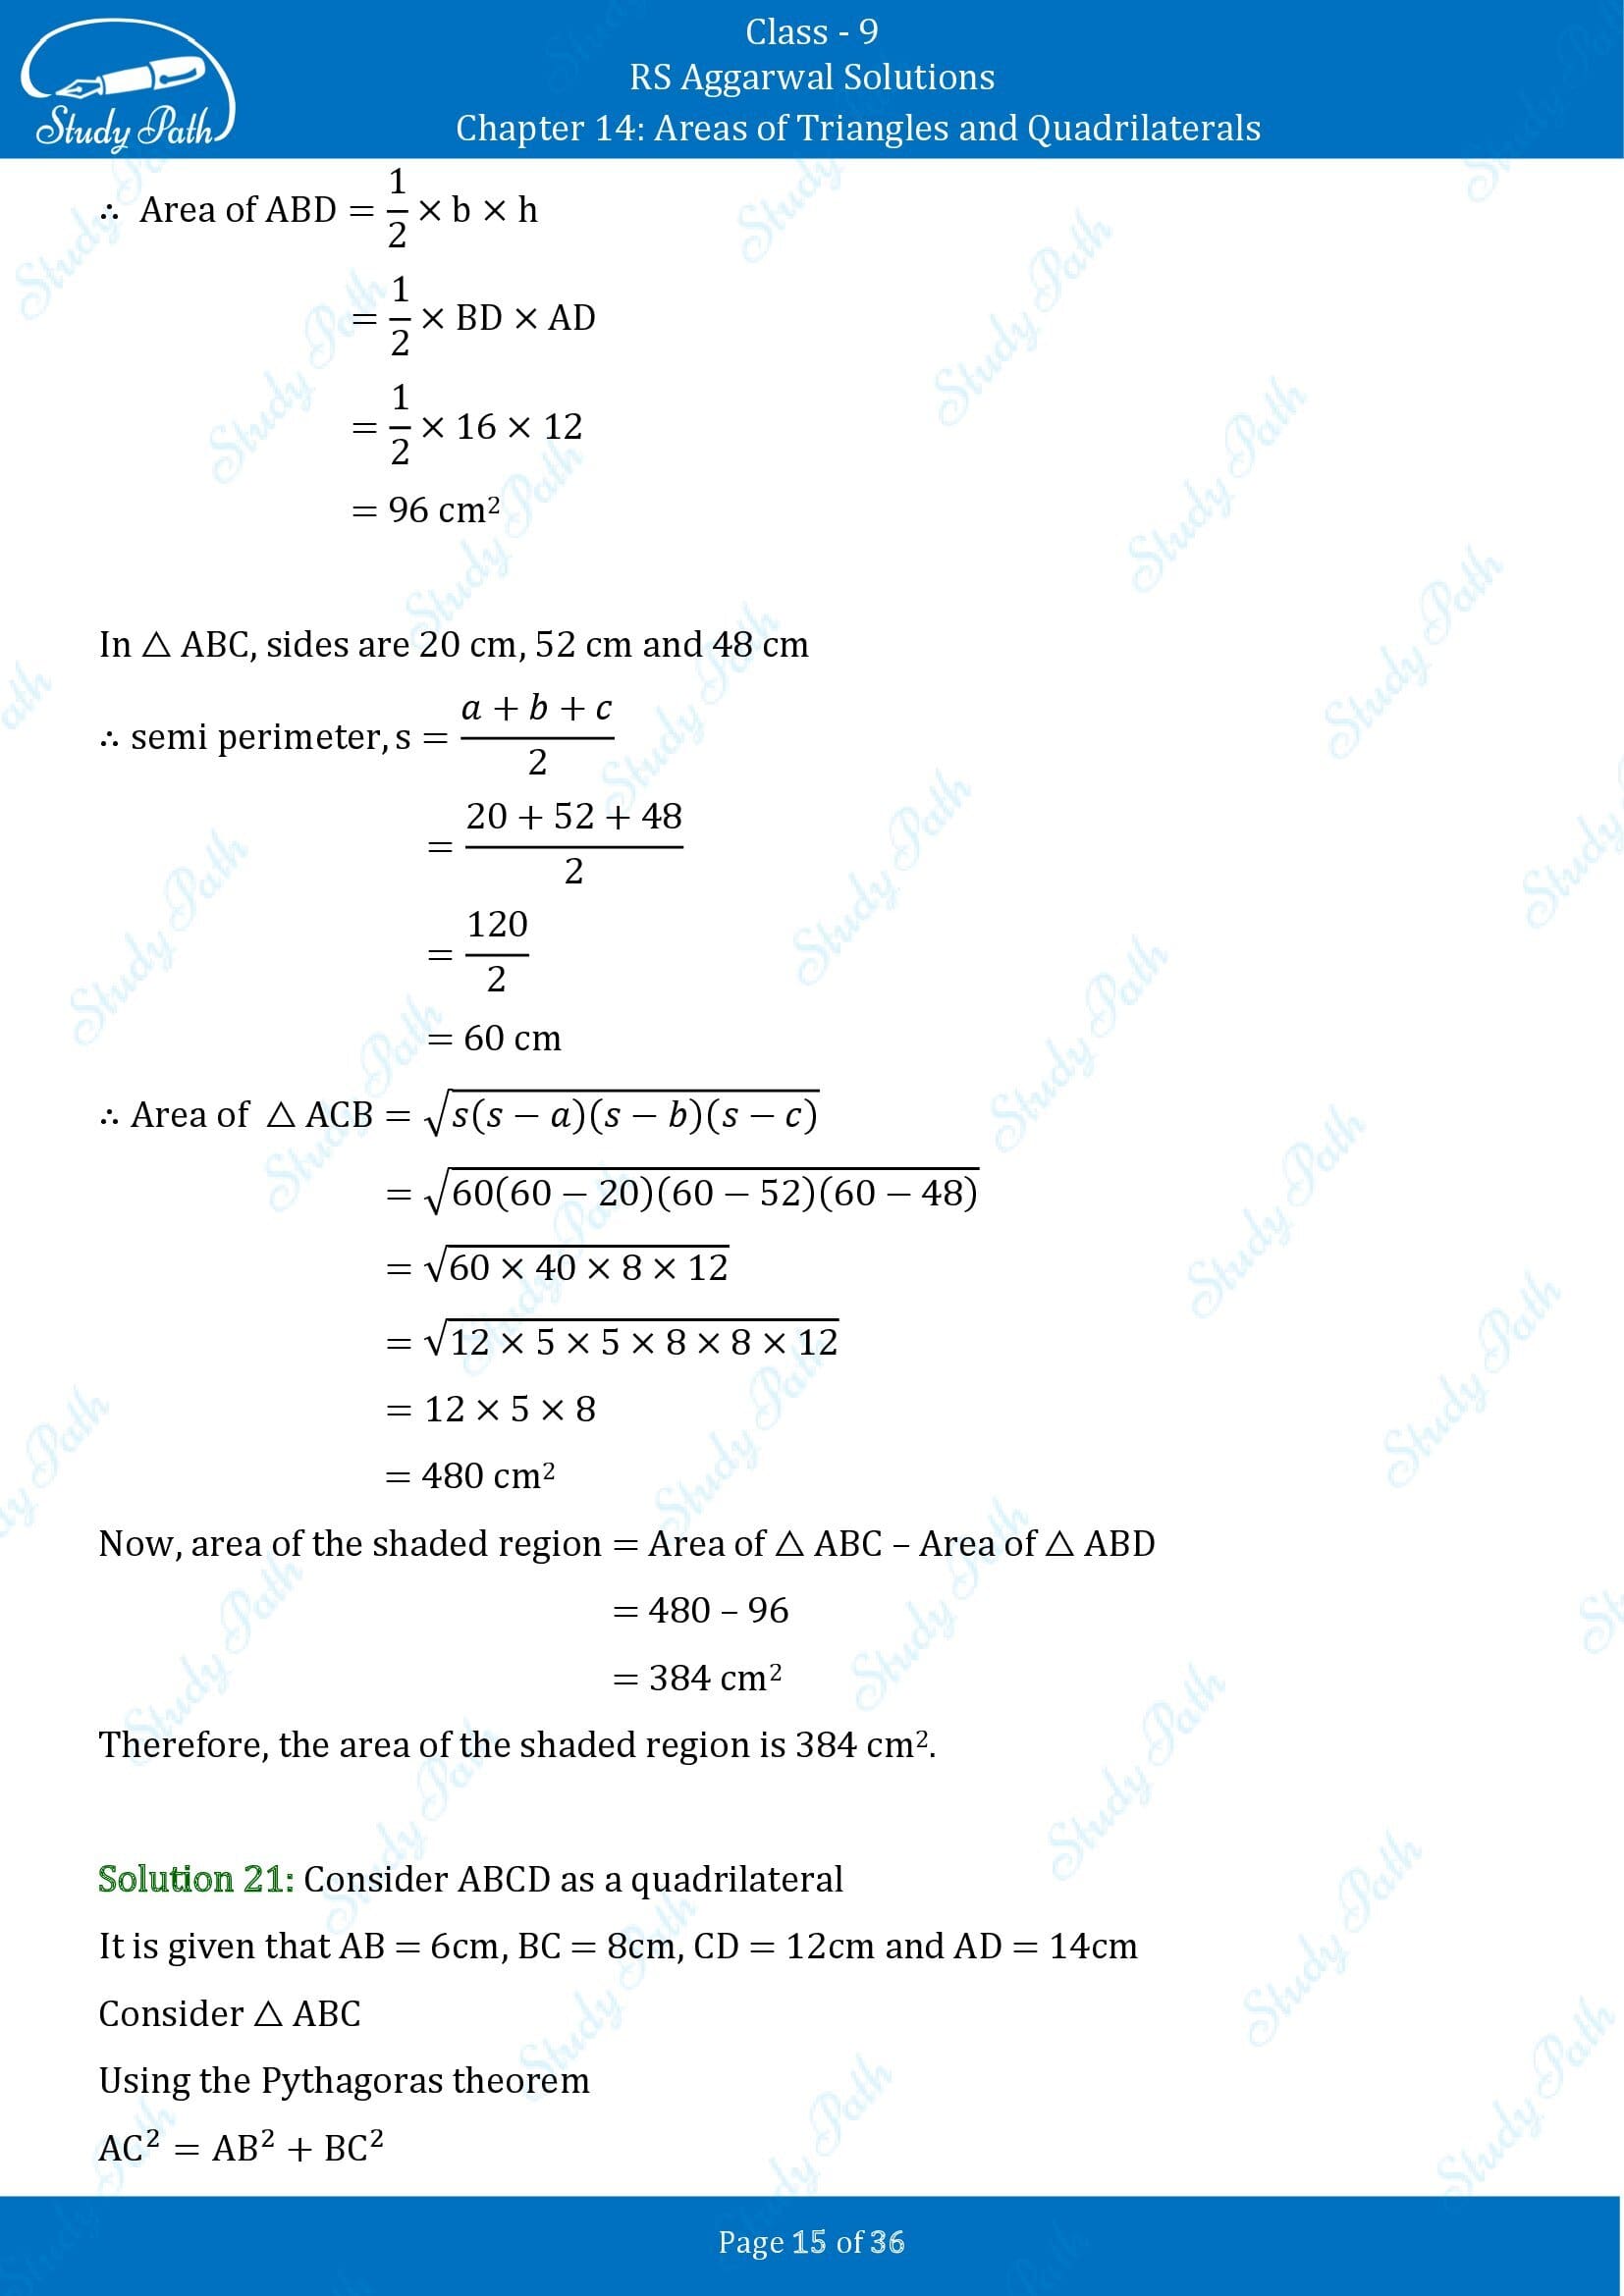 RS Aggarwal Solutions Class 9 Chapter 14 Areas of Triangles and Quadrilaterals Exercise 14 00015